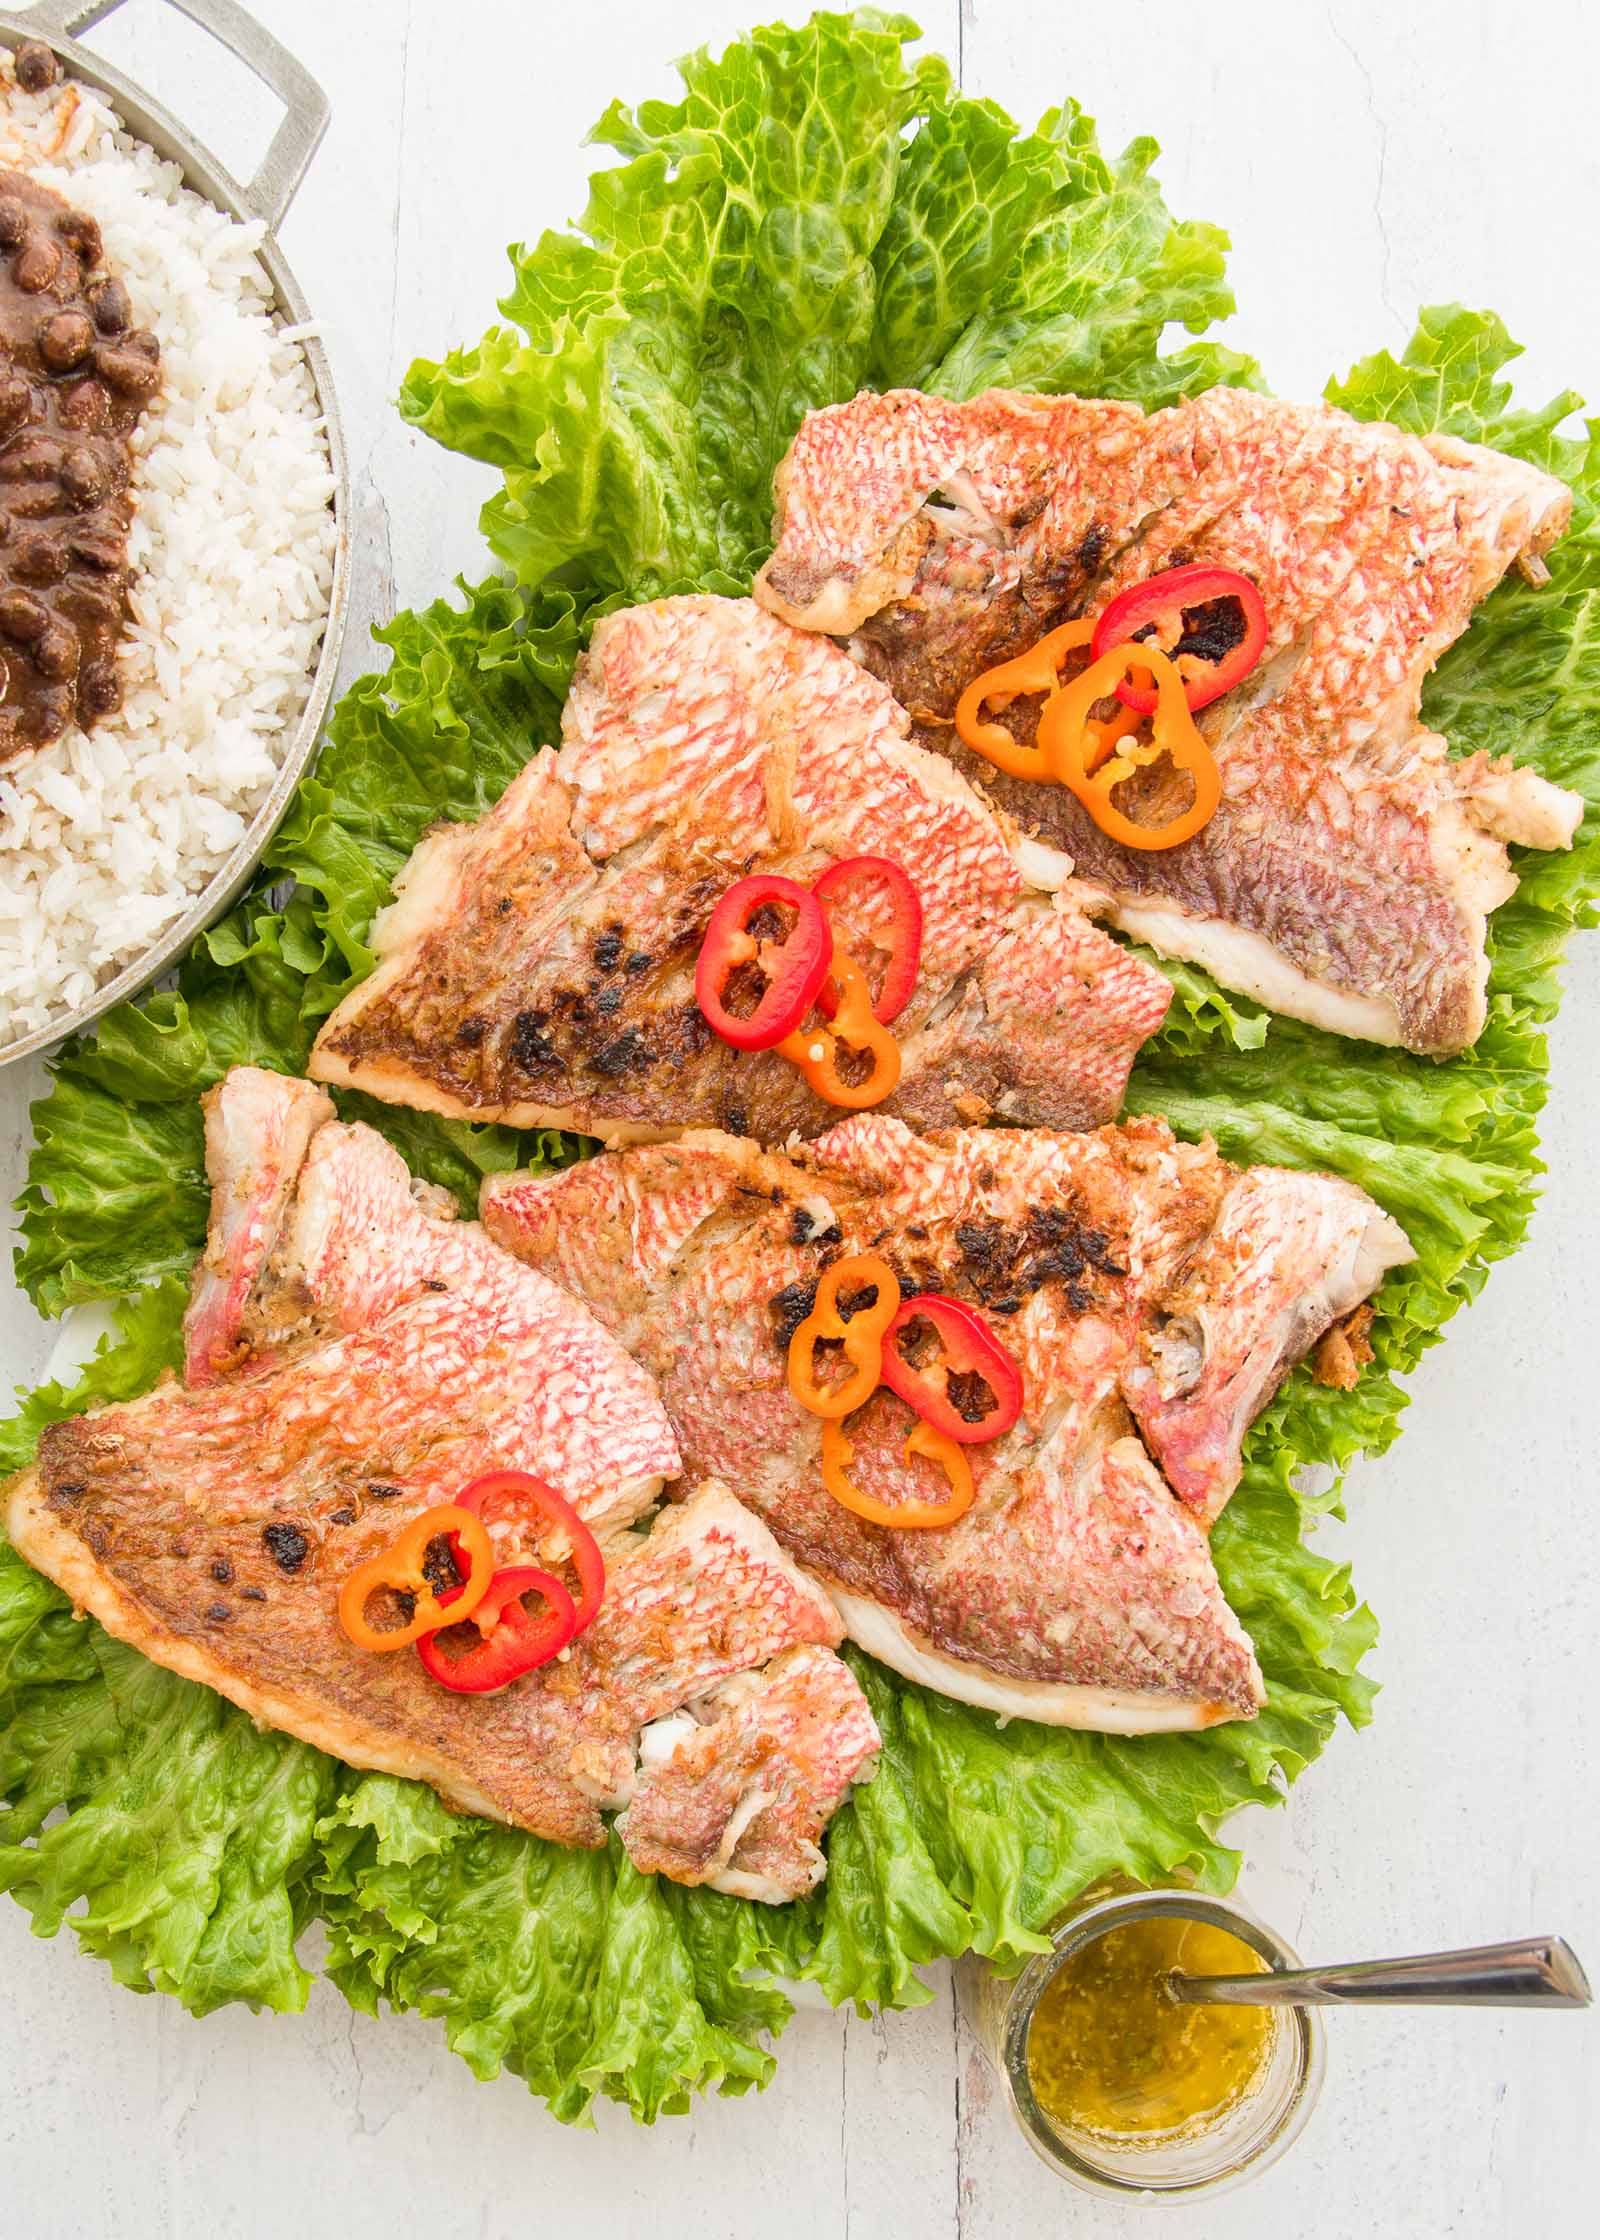 A platter of red snapper with garlic sauce is sitting vertically on a white table. Four crispy skinned snapper fillets are on top of a bed of frilly lettuce. Sliced red and orange peppers are on each fillet. A large pot of rice and black beans is in partial view to the left. A small jar of garlic sauce is in the bottom right corner.